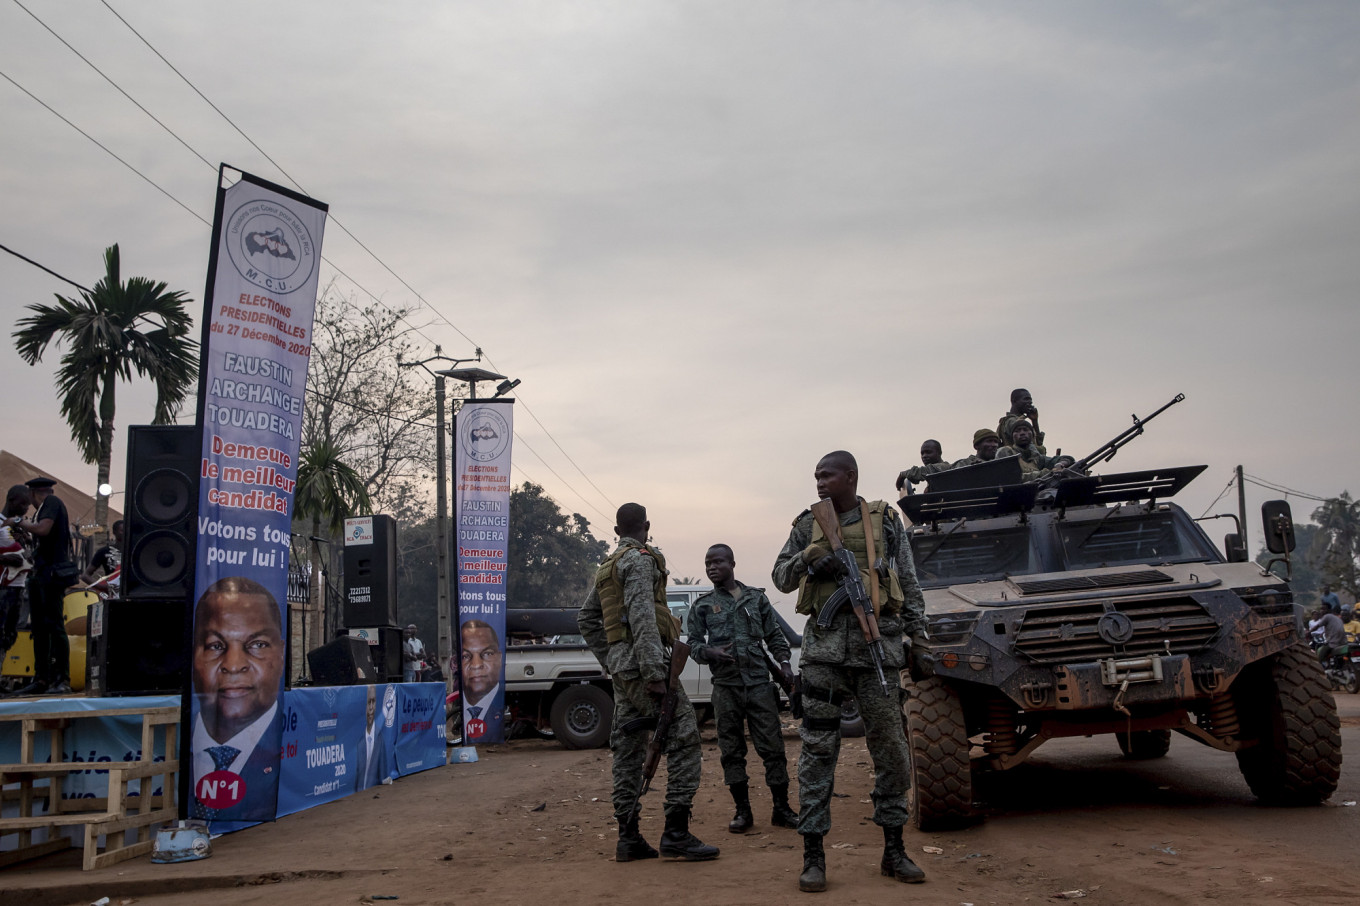 Russia Pulling ‘Military Instructors’ Out of Central African Republic